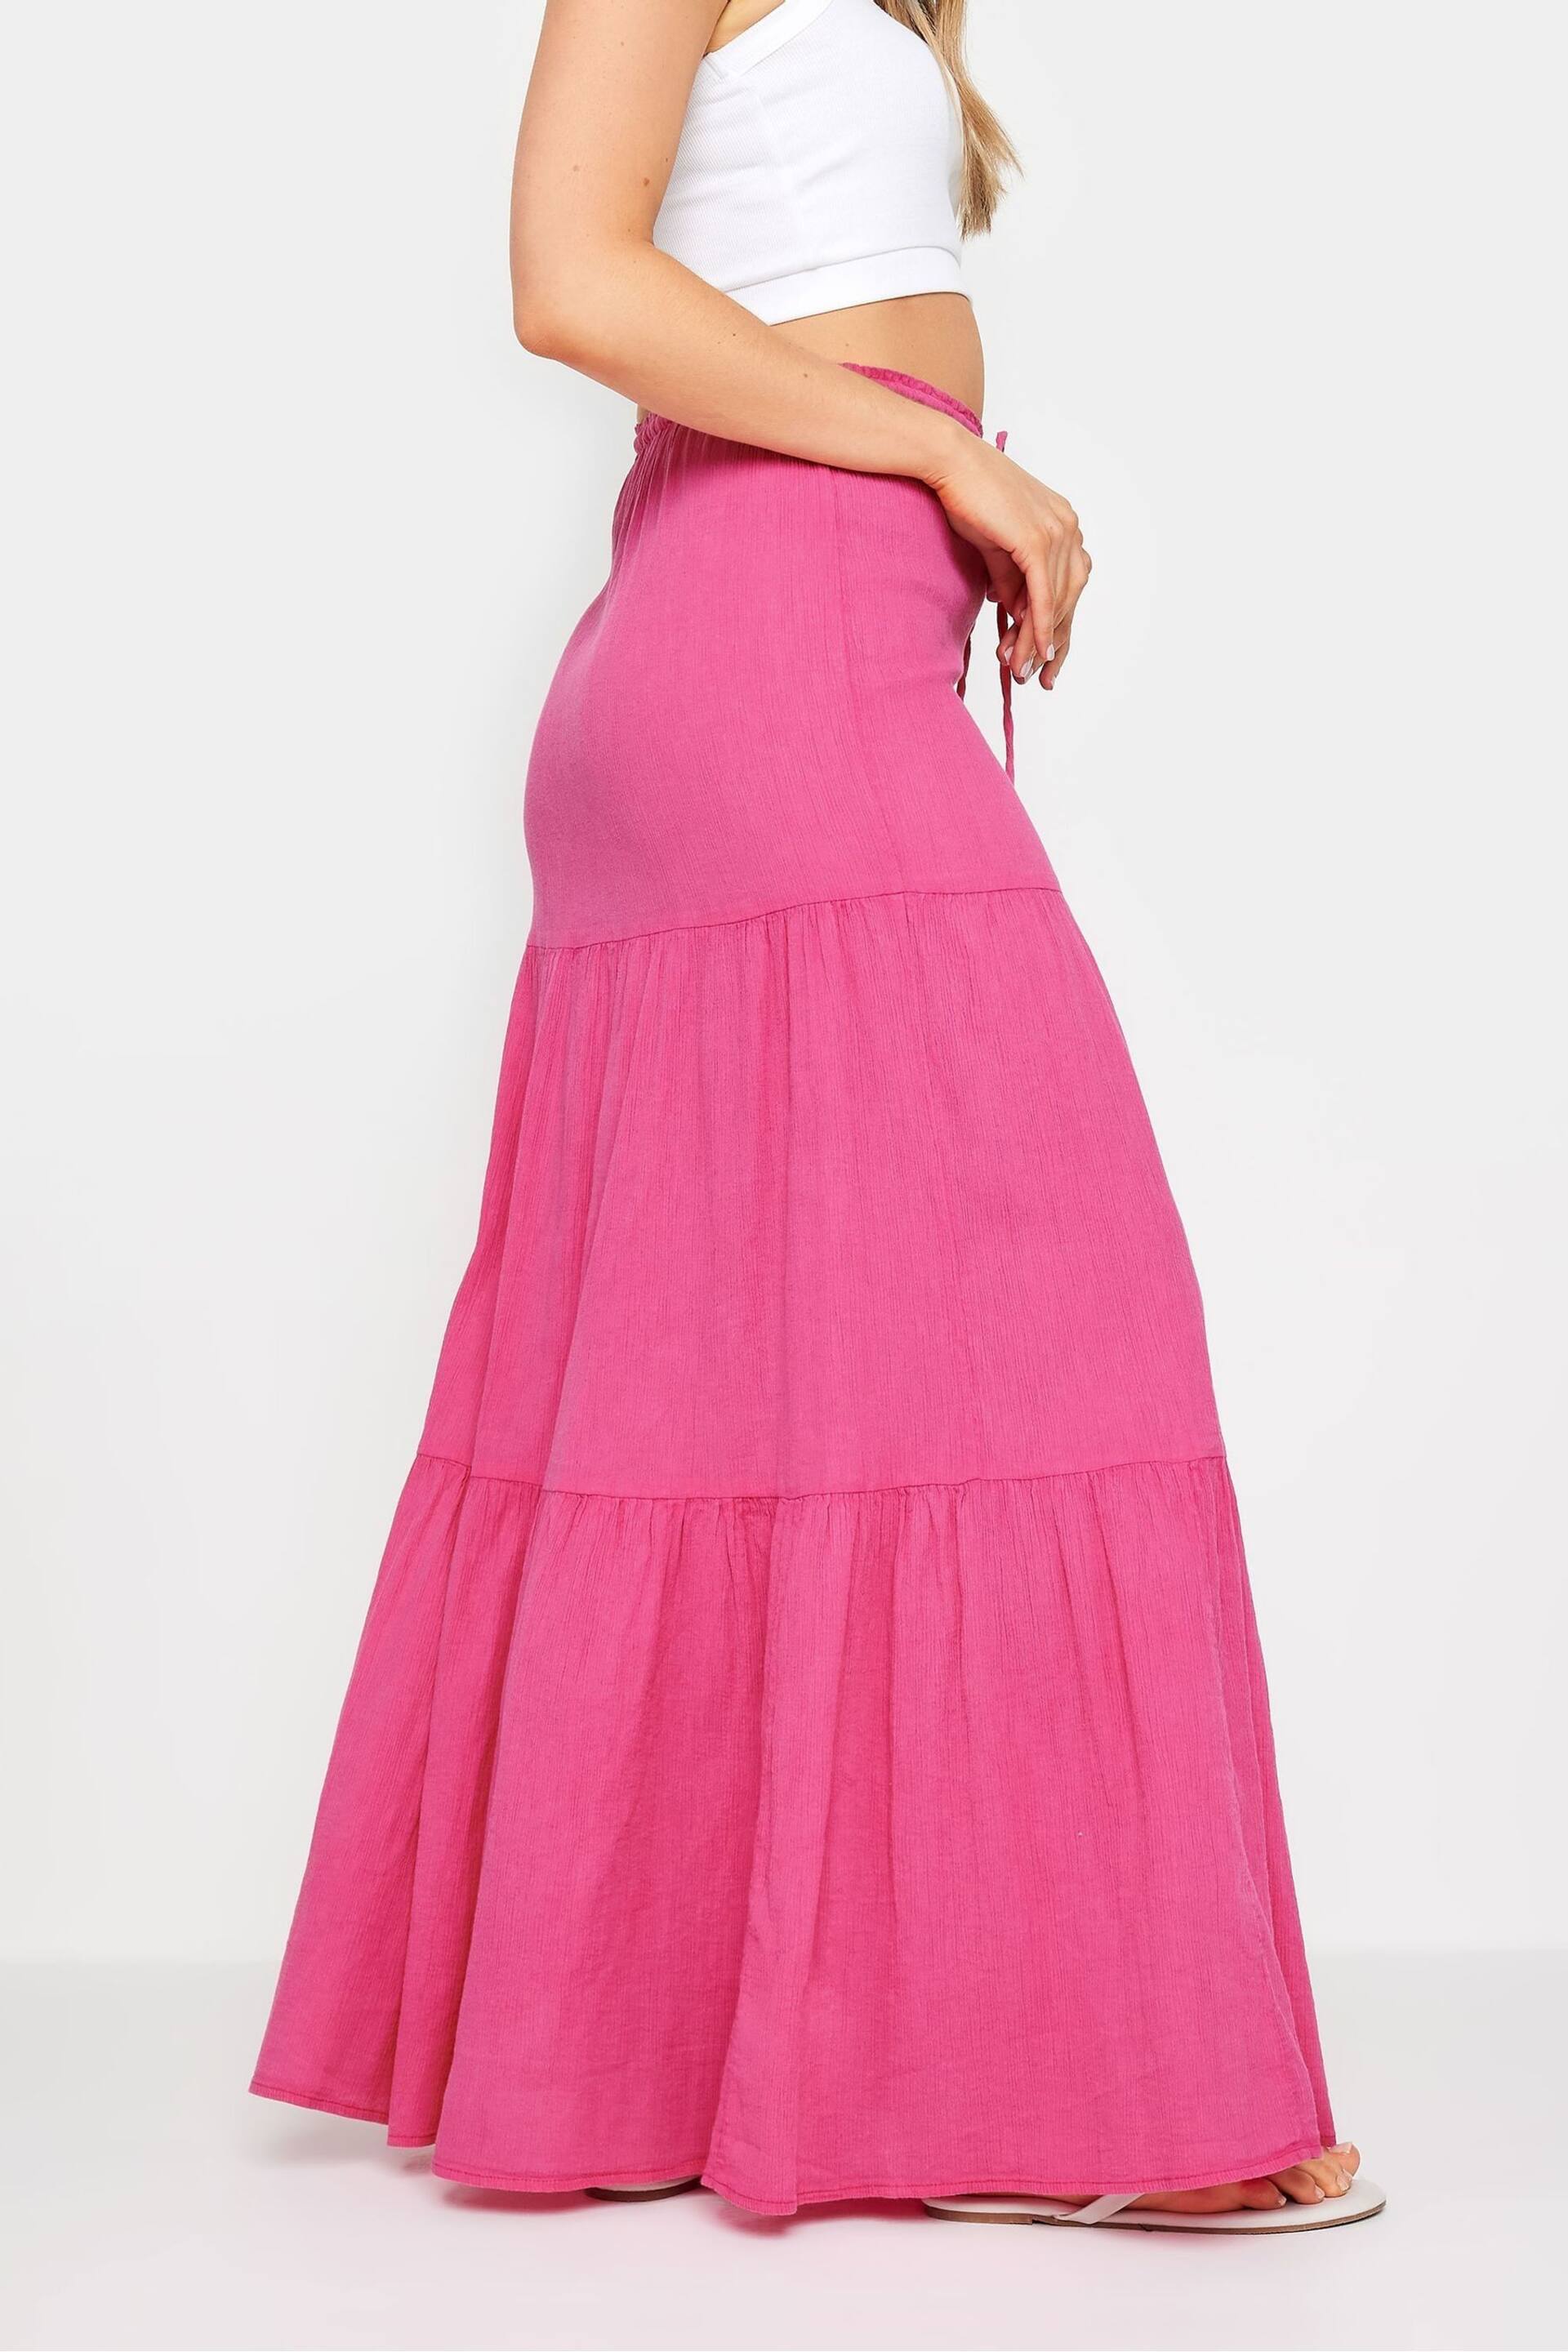 Long Tall Sally Pink Acid Wash Tiered Maxi Skirt - Image 3 of 4